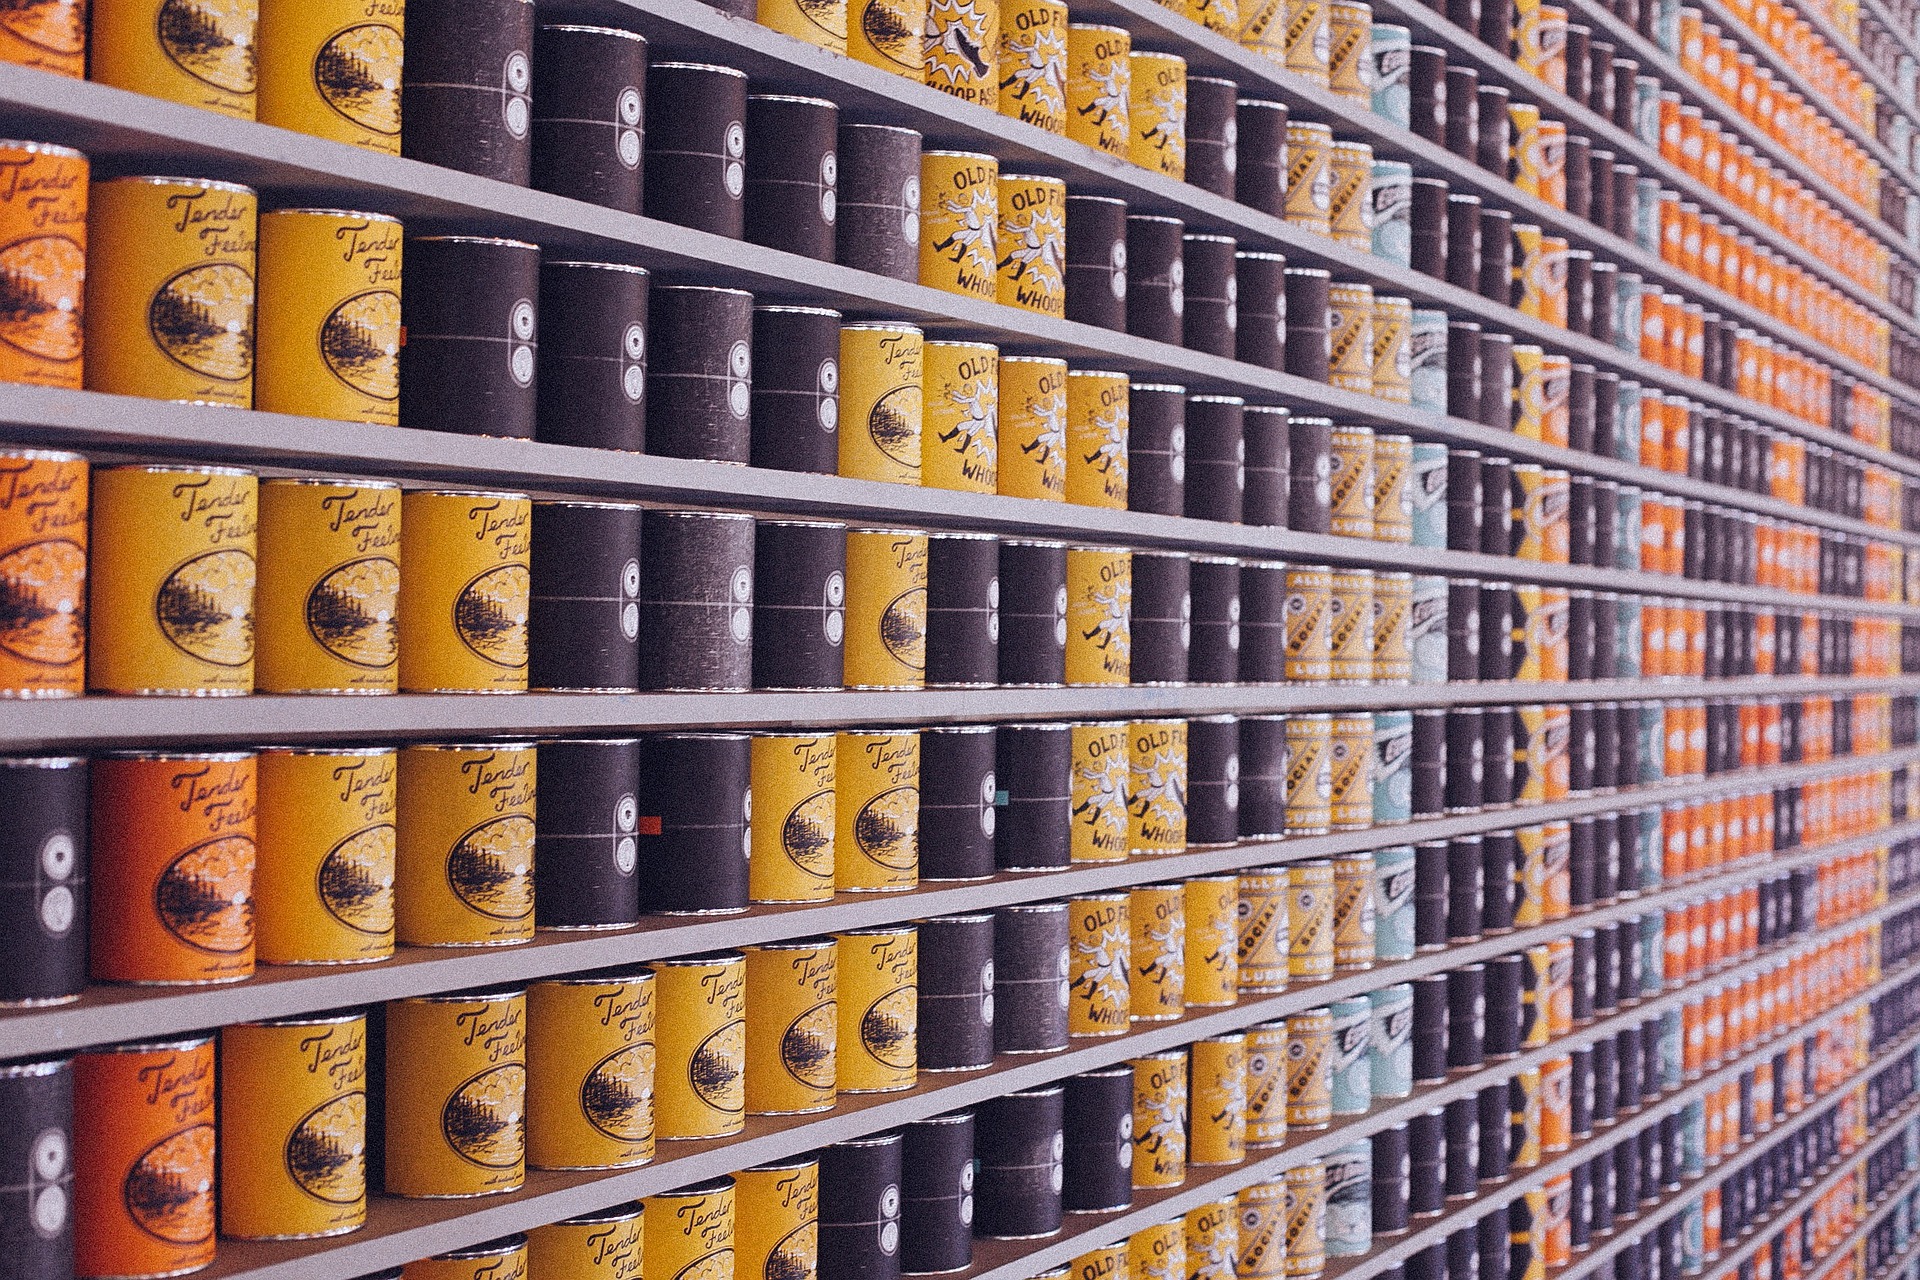 An aisle of canned food in a grocery store